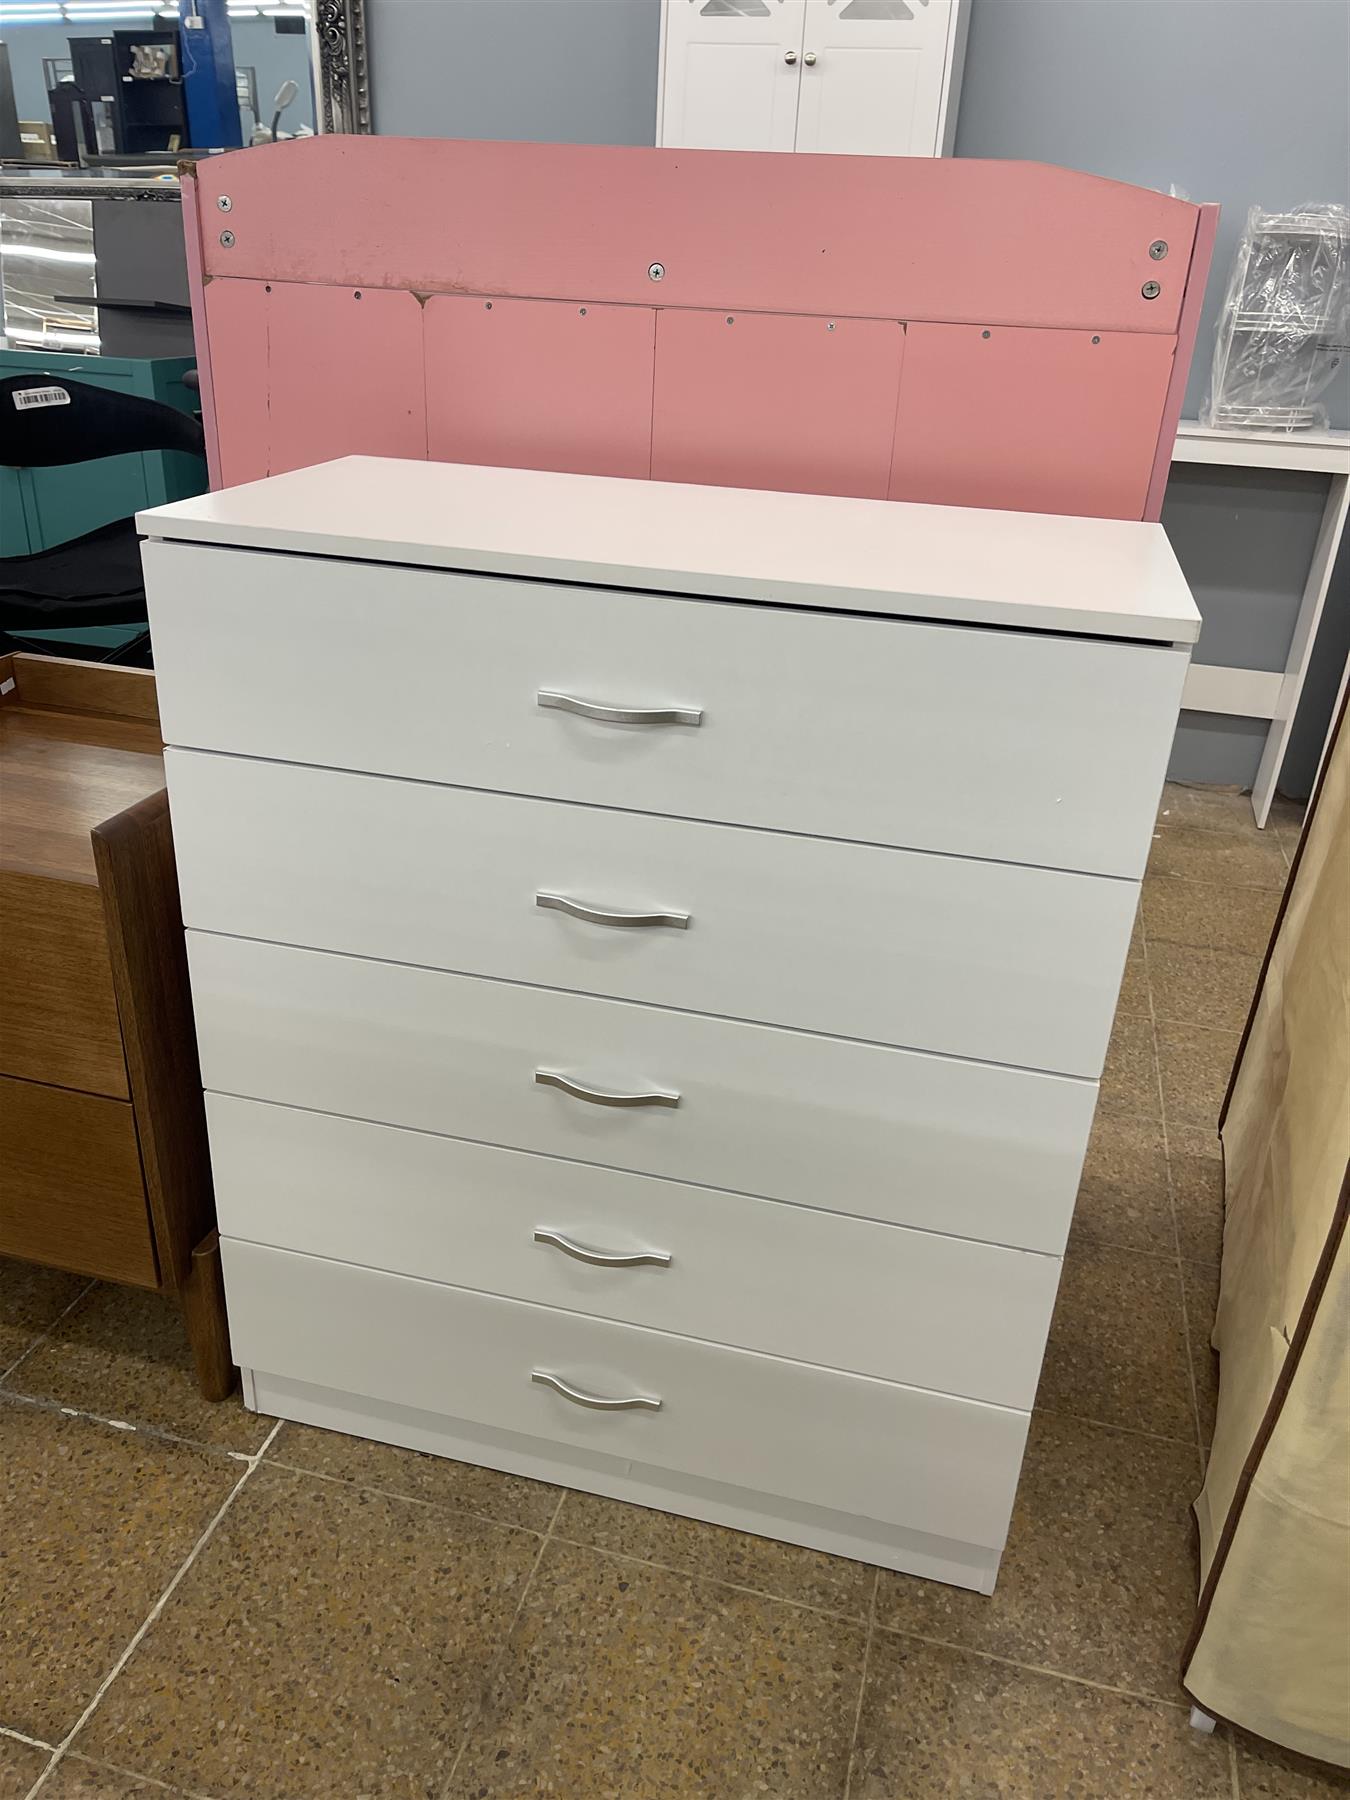 Riano 5 Drawer Chest